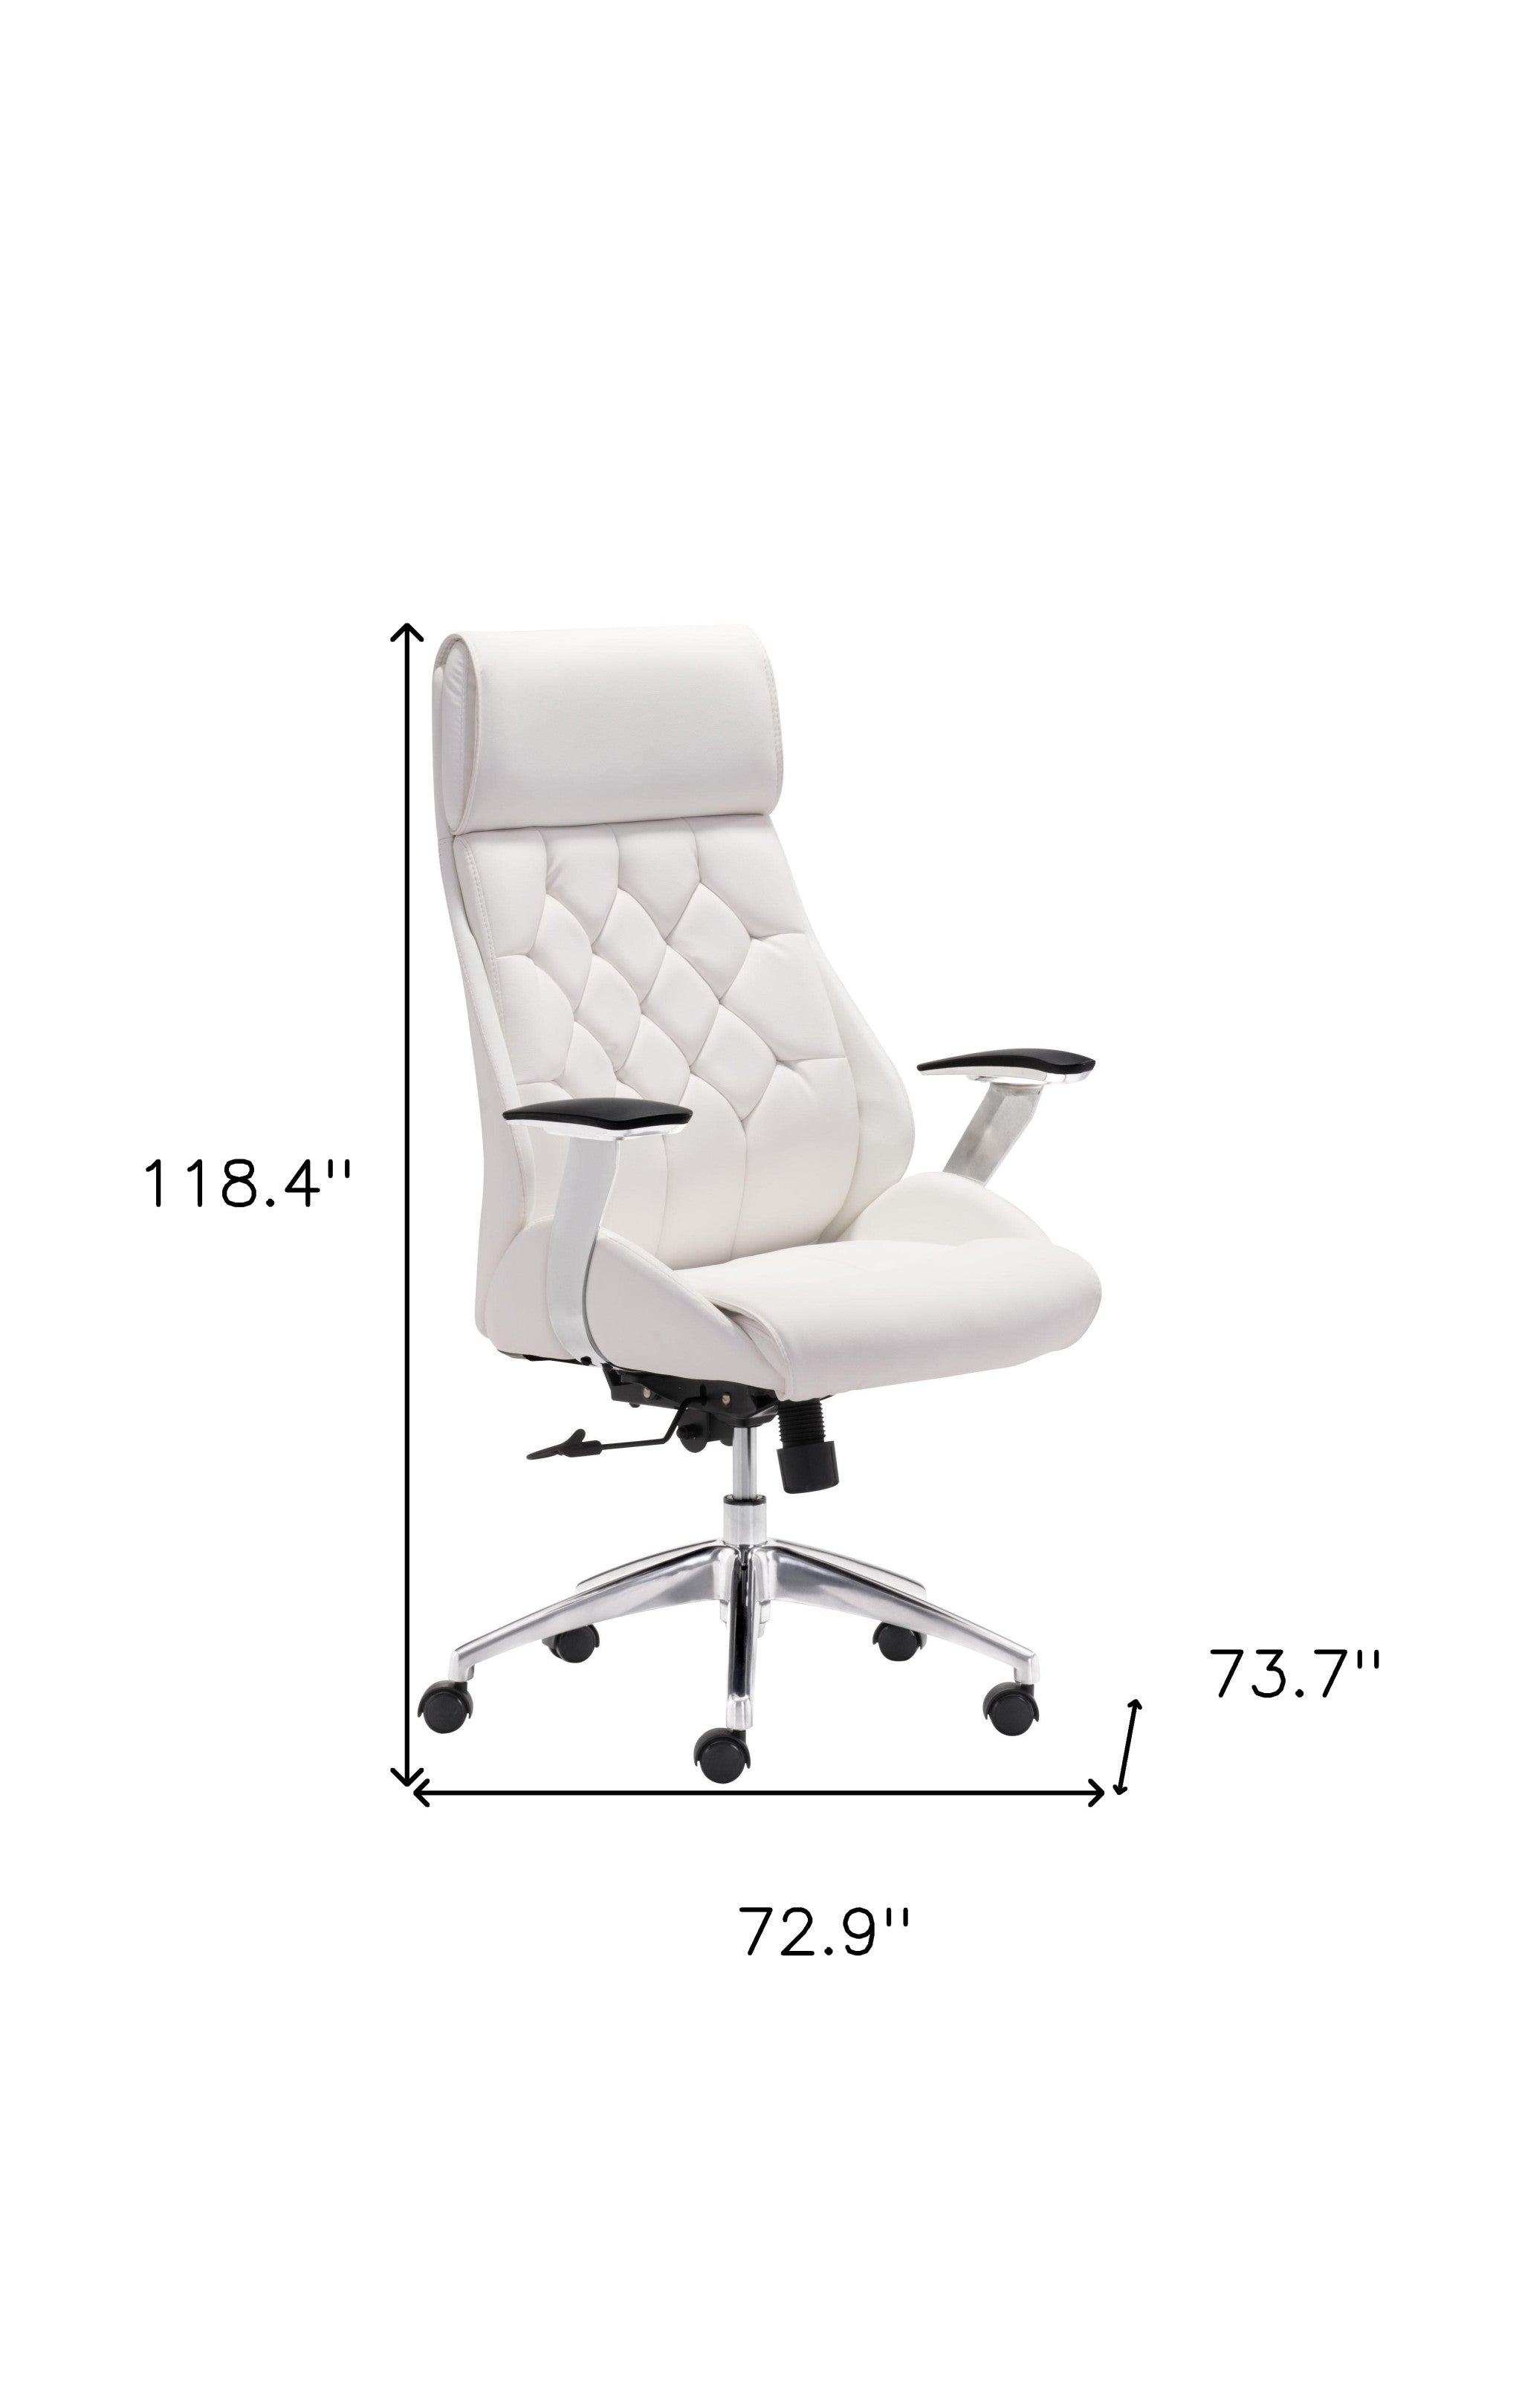 White and Silver Adjustable Swivel Metal Rolling Executive Office Chair